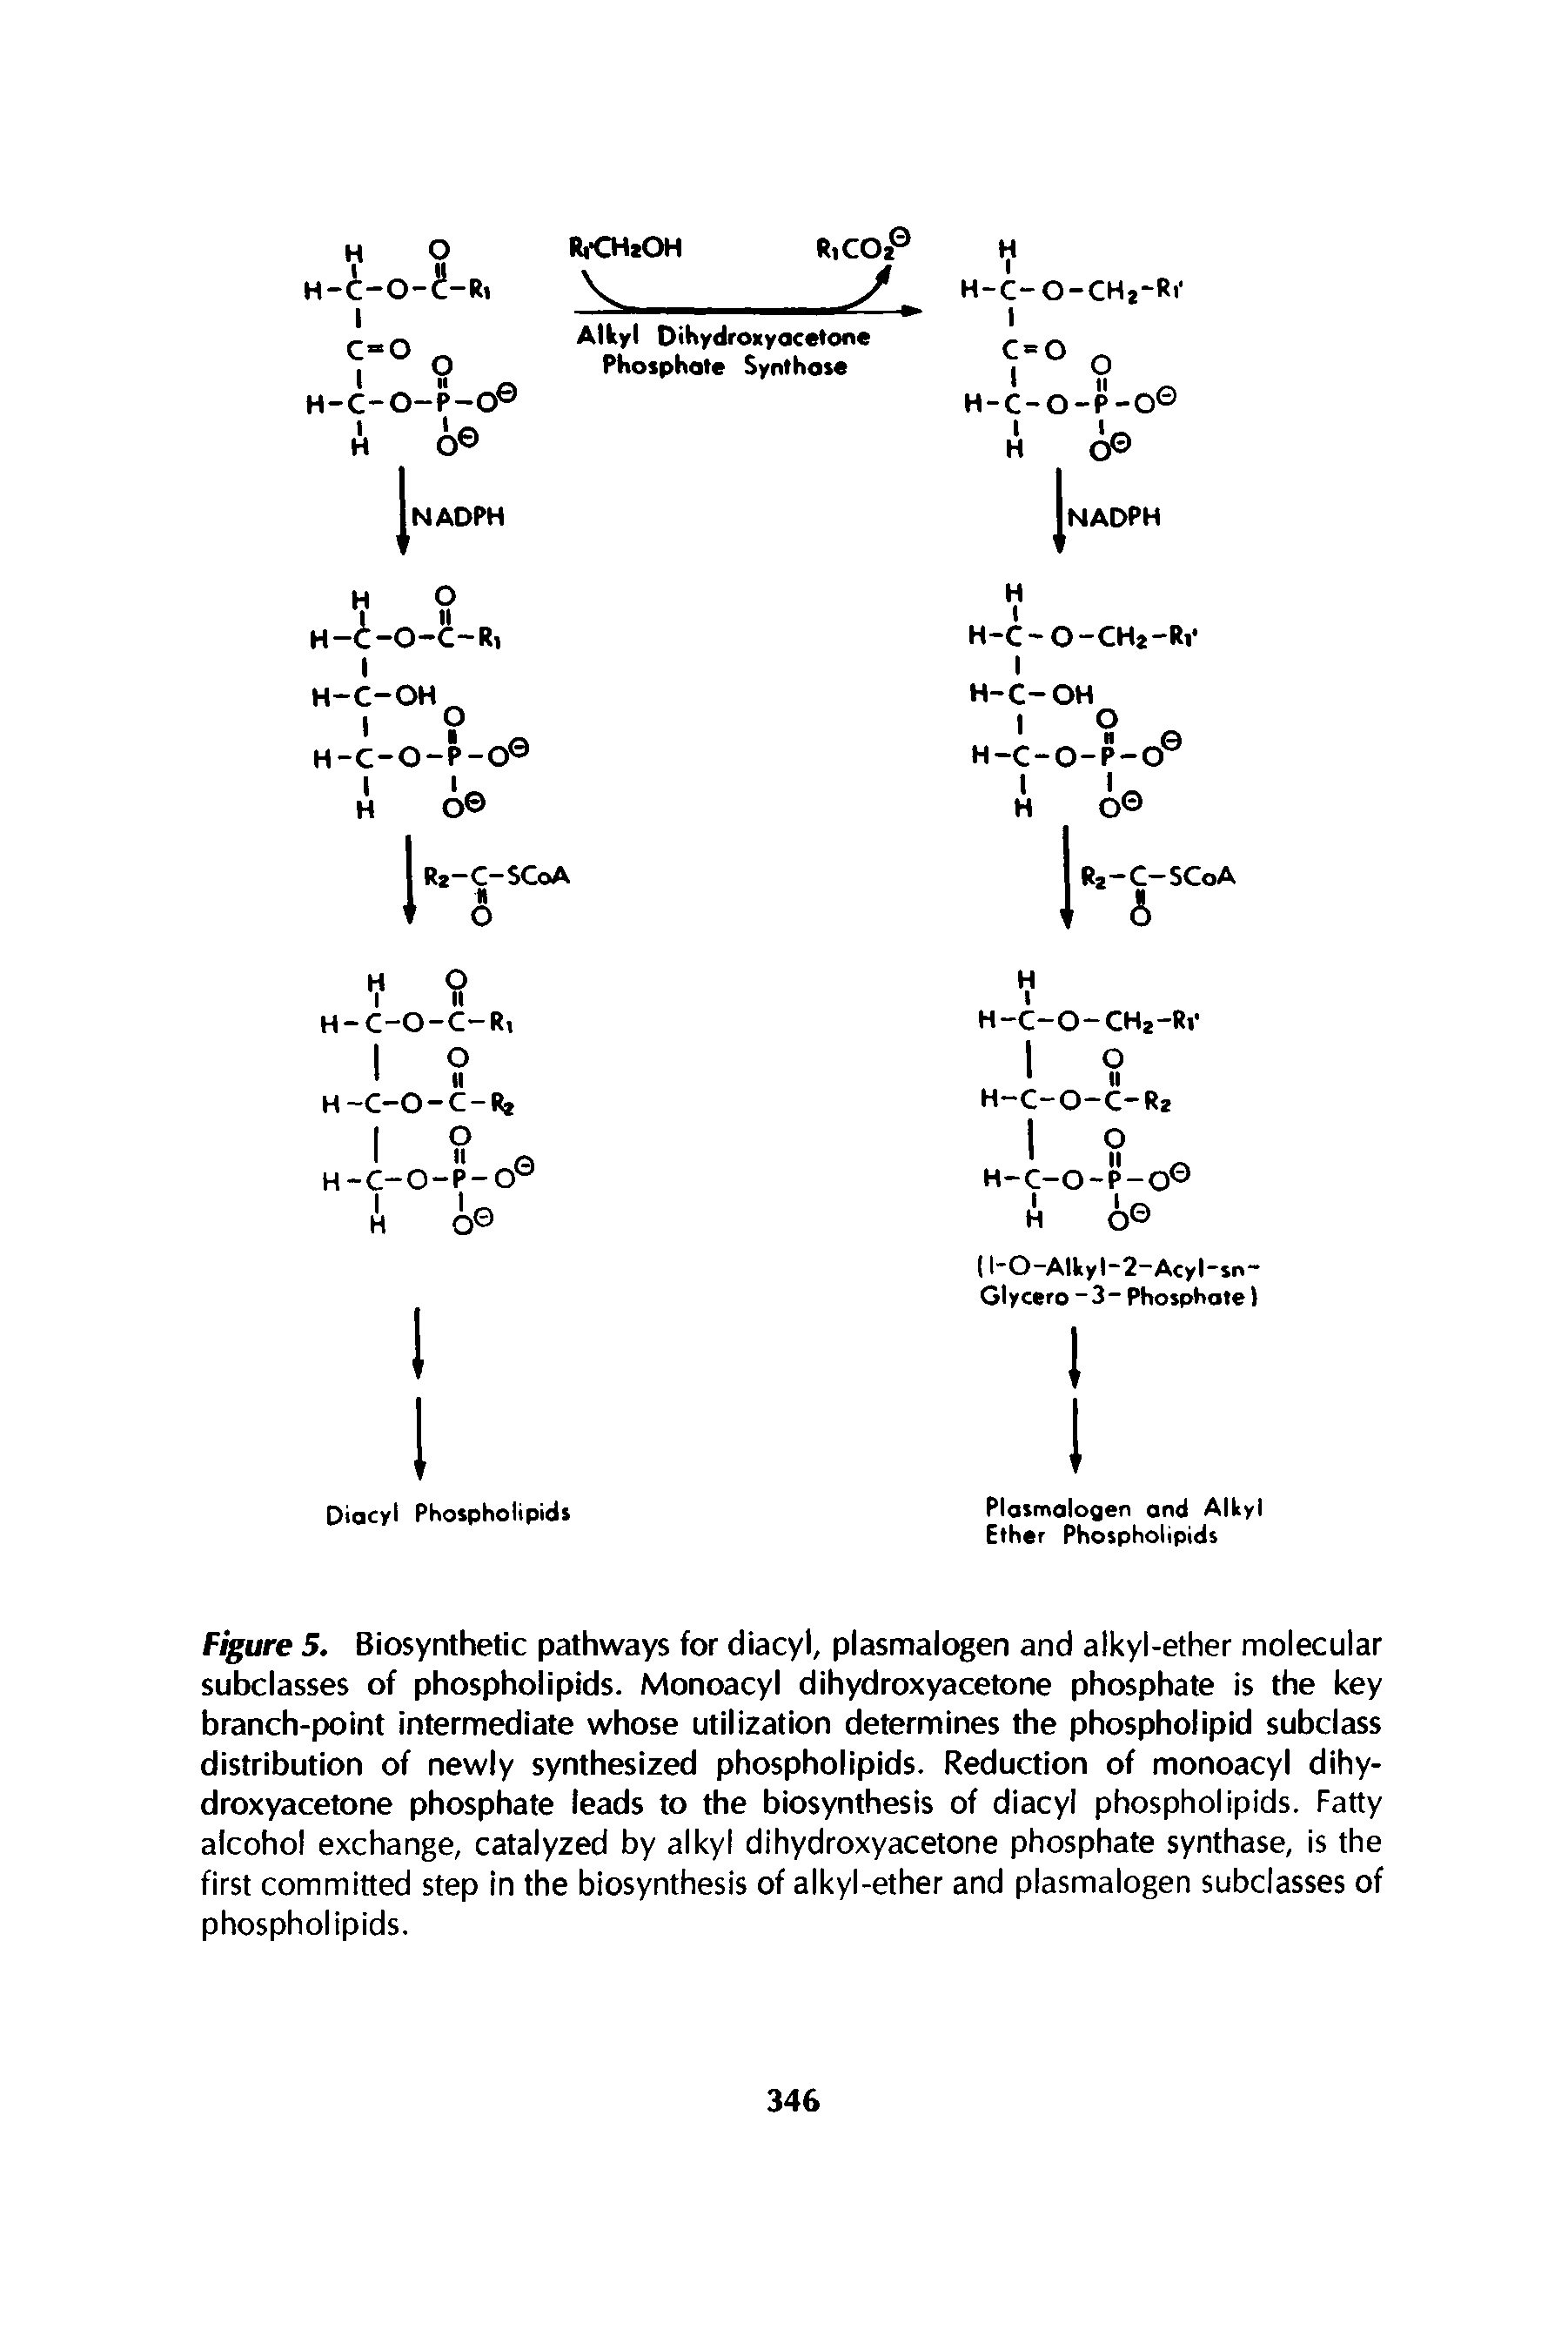 Figure 5. Biosynthetic pathways for diacyl, plasmalogen and alkyl-ether molecular subclasses of phospholipids. Monoacyl dihydroxyacetone phosphate is the key branch-point intermediate whose utilization determines the phospholipid subclass distribution of newly synthesized phospholipids. Reduction of monoacyl dihydroxyacetone phosphate leads to the biosynthesis of diacyl phospholipids. Fatty alcohol exchange, catalyzed by alkyl dihydroxyacetone phosphate synthase, is the first committed step in the biosynthesis of alkyl-ether and plasmalogen subclasses of phospholipids.